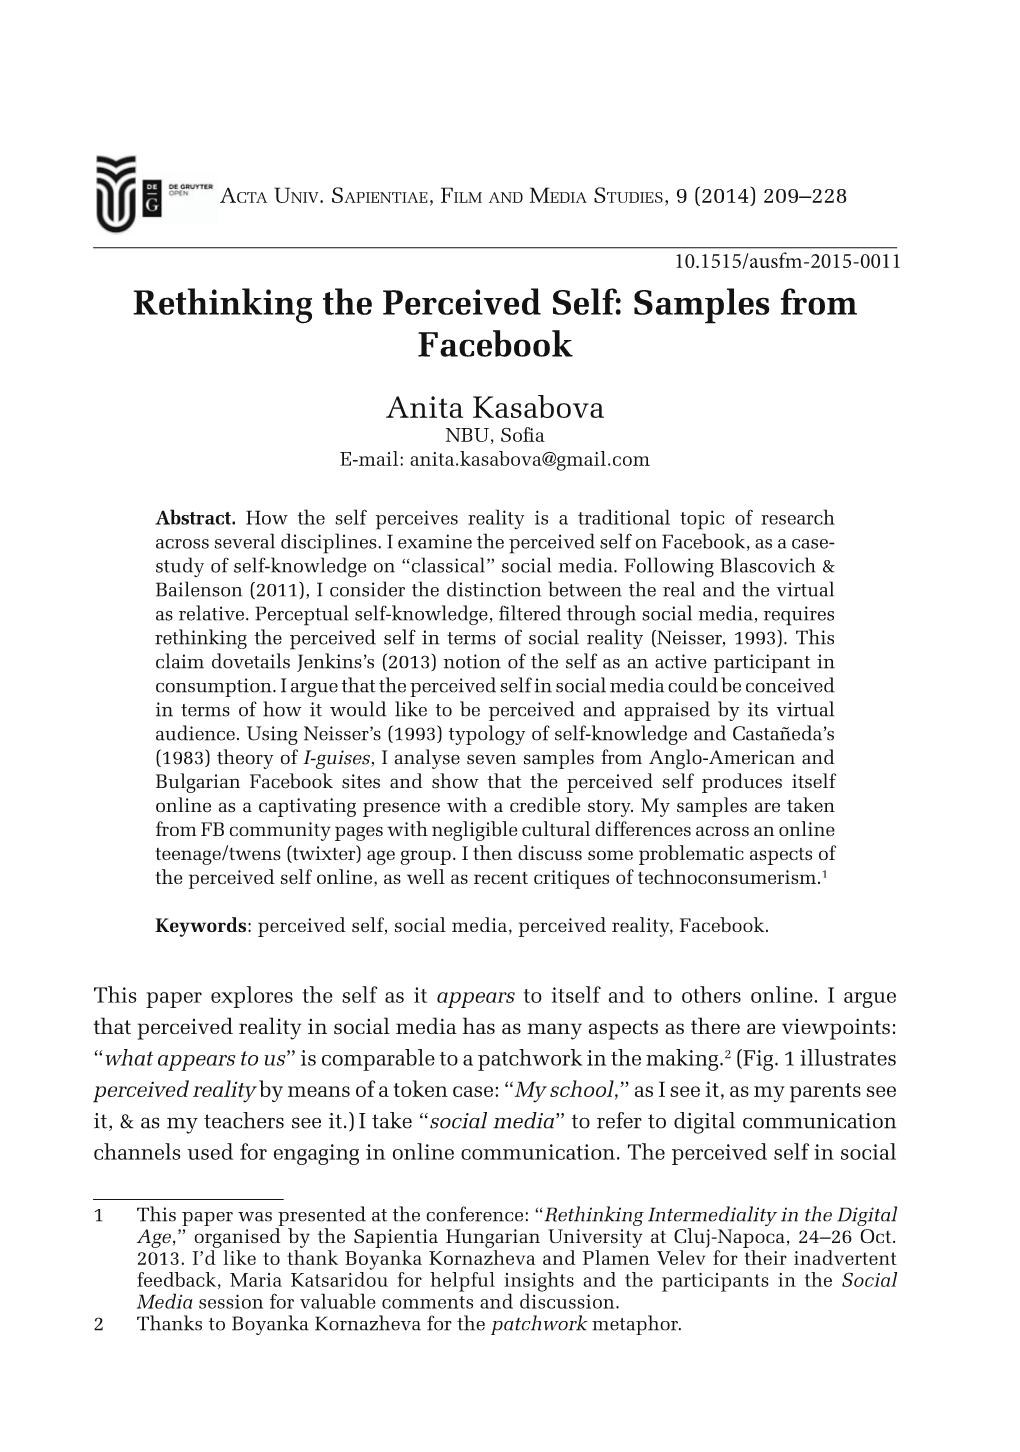 Rethinking the Perceived Self: Samples from Facebook Anita Kasabova ."5 3Ola E-Mail: Anita.Kasabova@Gmail.Com